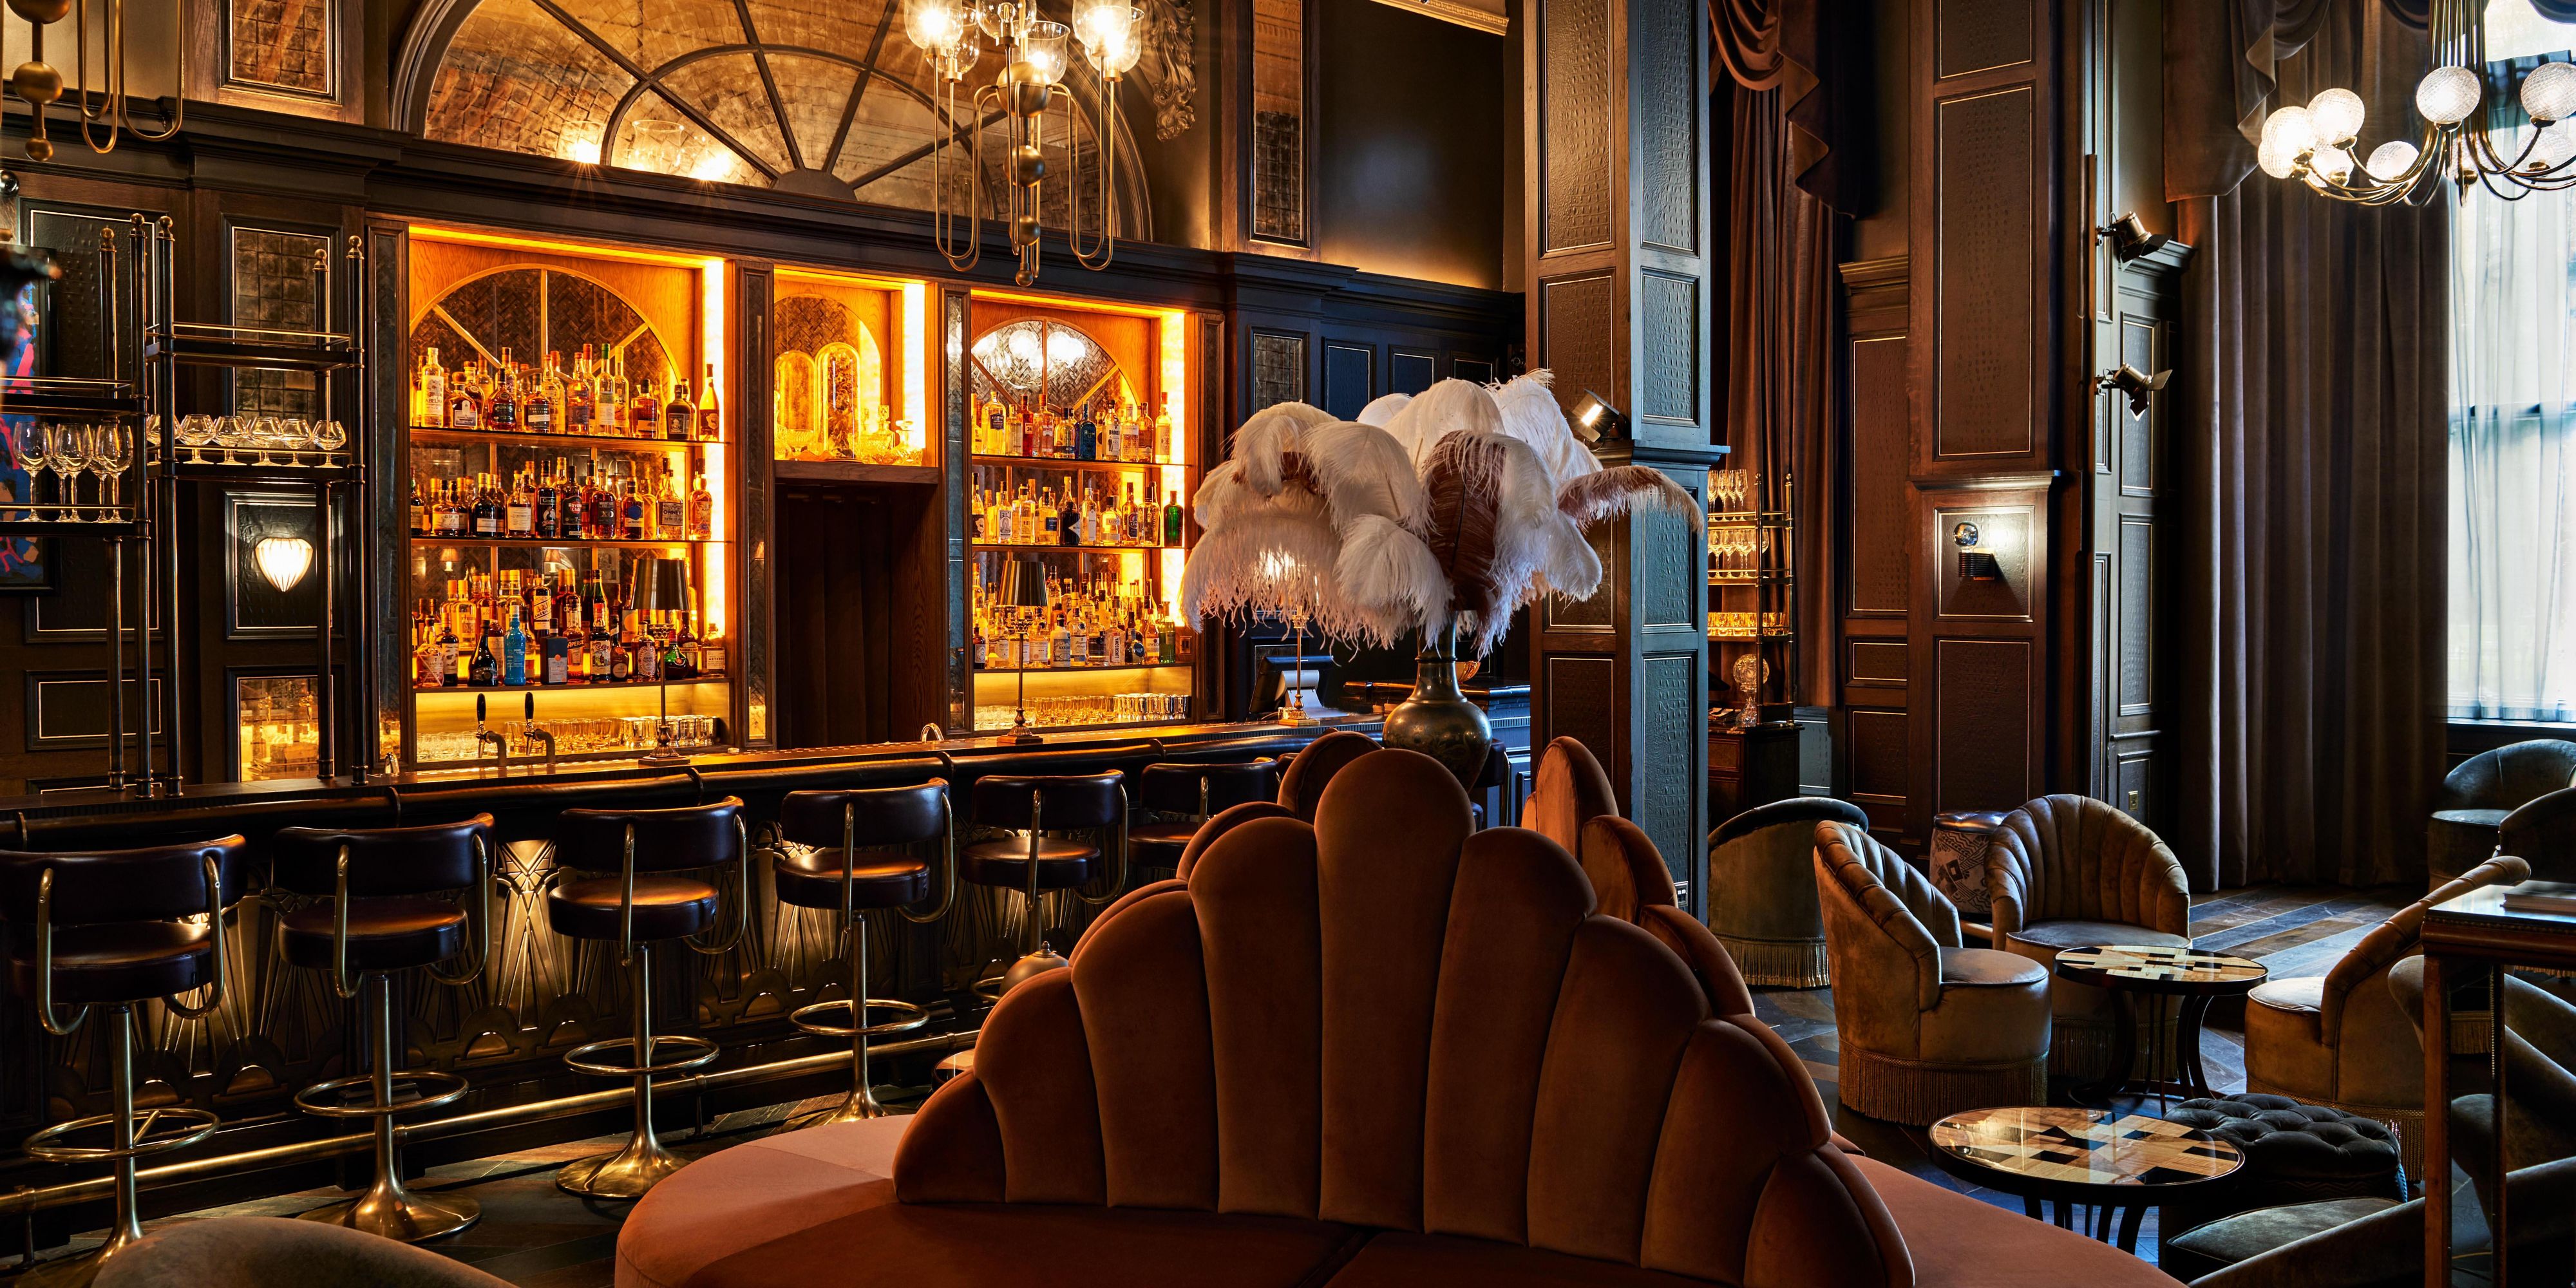 On any given night, you’ll find movers and shakers gossiping over cockails at Fitz’s, named after Charles Fitzroy Doll, the original architect of Kimpton Fitzroy London. The plush, glamorous cocktail den has an air that’s electric with possibility—as if the revelry could go on well into the night.